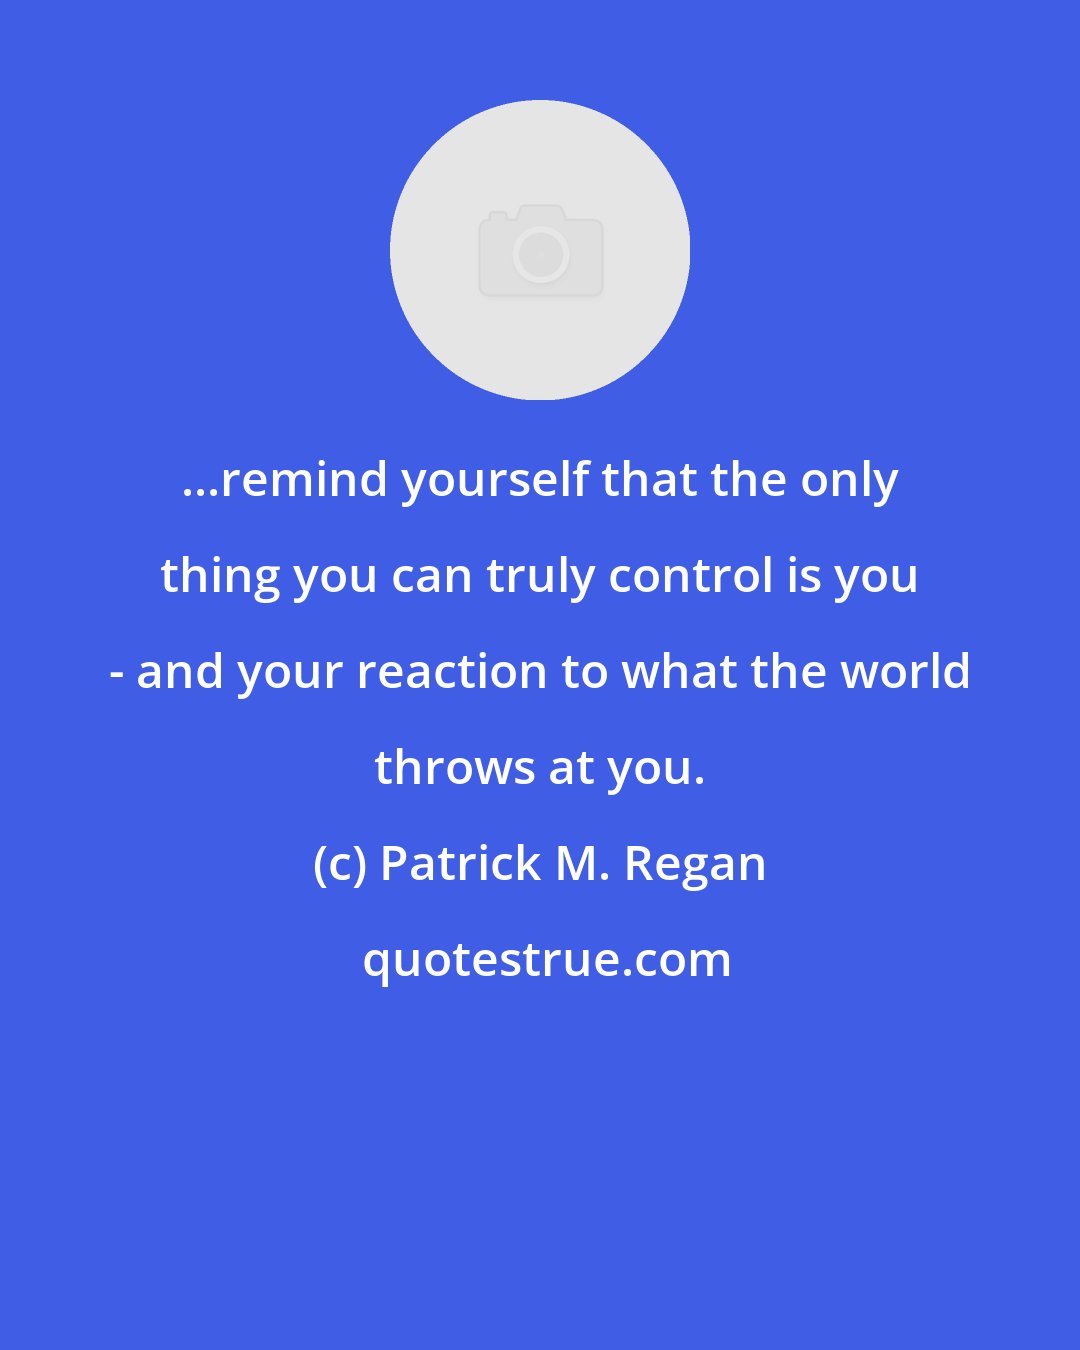 Patrick M. Regan: ...remind yourself that the only thing you can truly control is you - and your reaction to what the world throws at you.